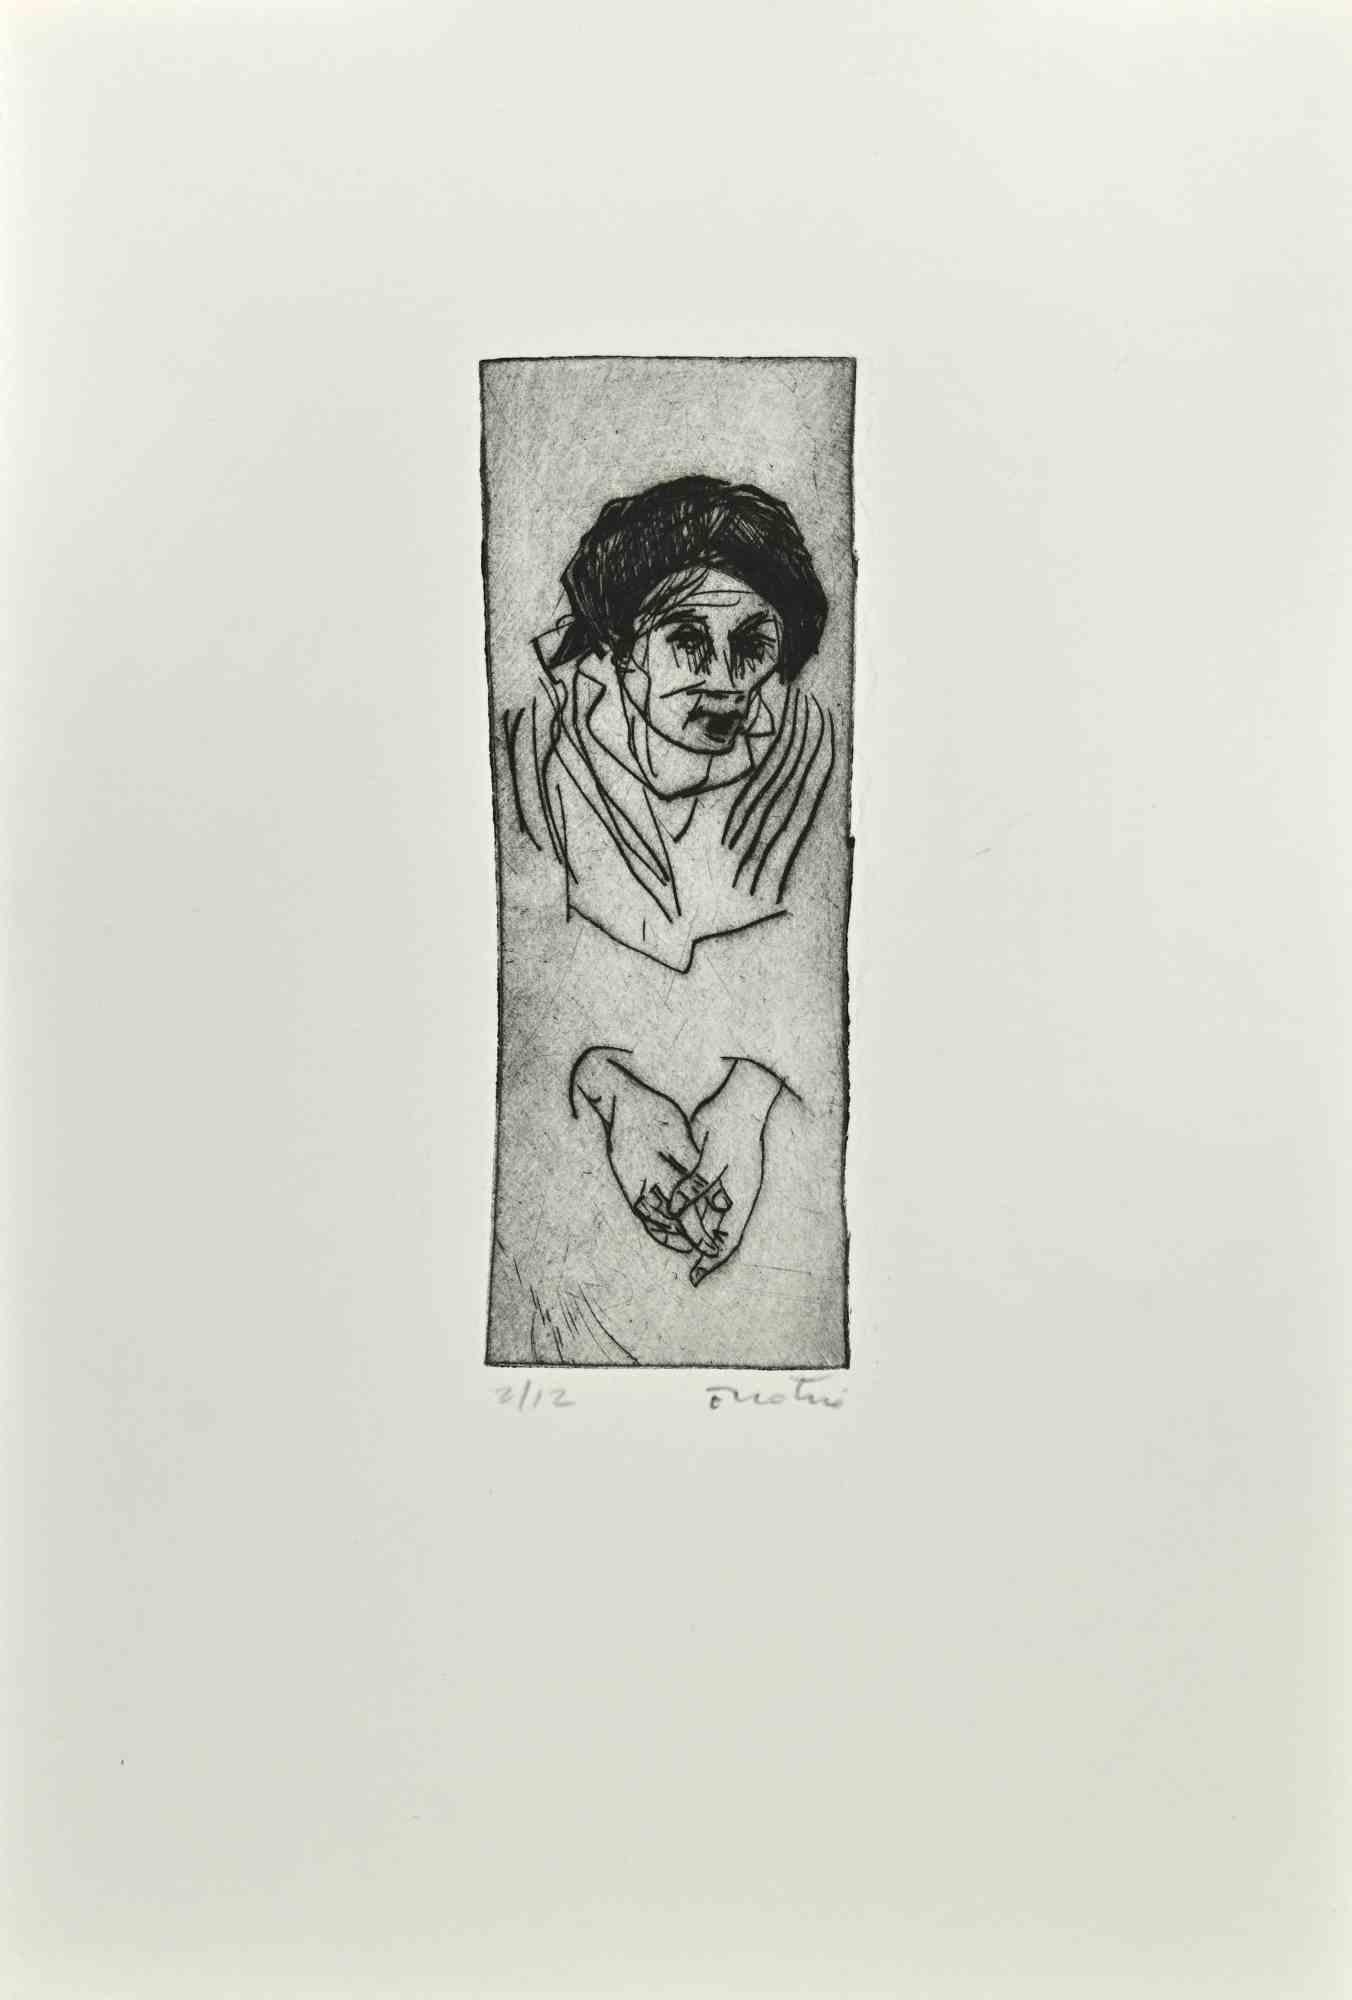 Woman in Prayer is an Etching realized by Enotrio Pugliese in 1963.

Limited edition of 12 copies numbered and signed by the artist.

Good condition on a white cardboard.

Enotrio Pugliese (May 11, 1920 - August 1989) was an Italian painter. Born in